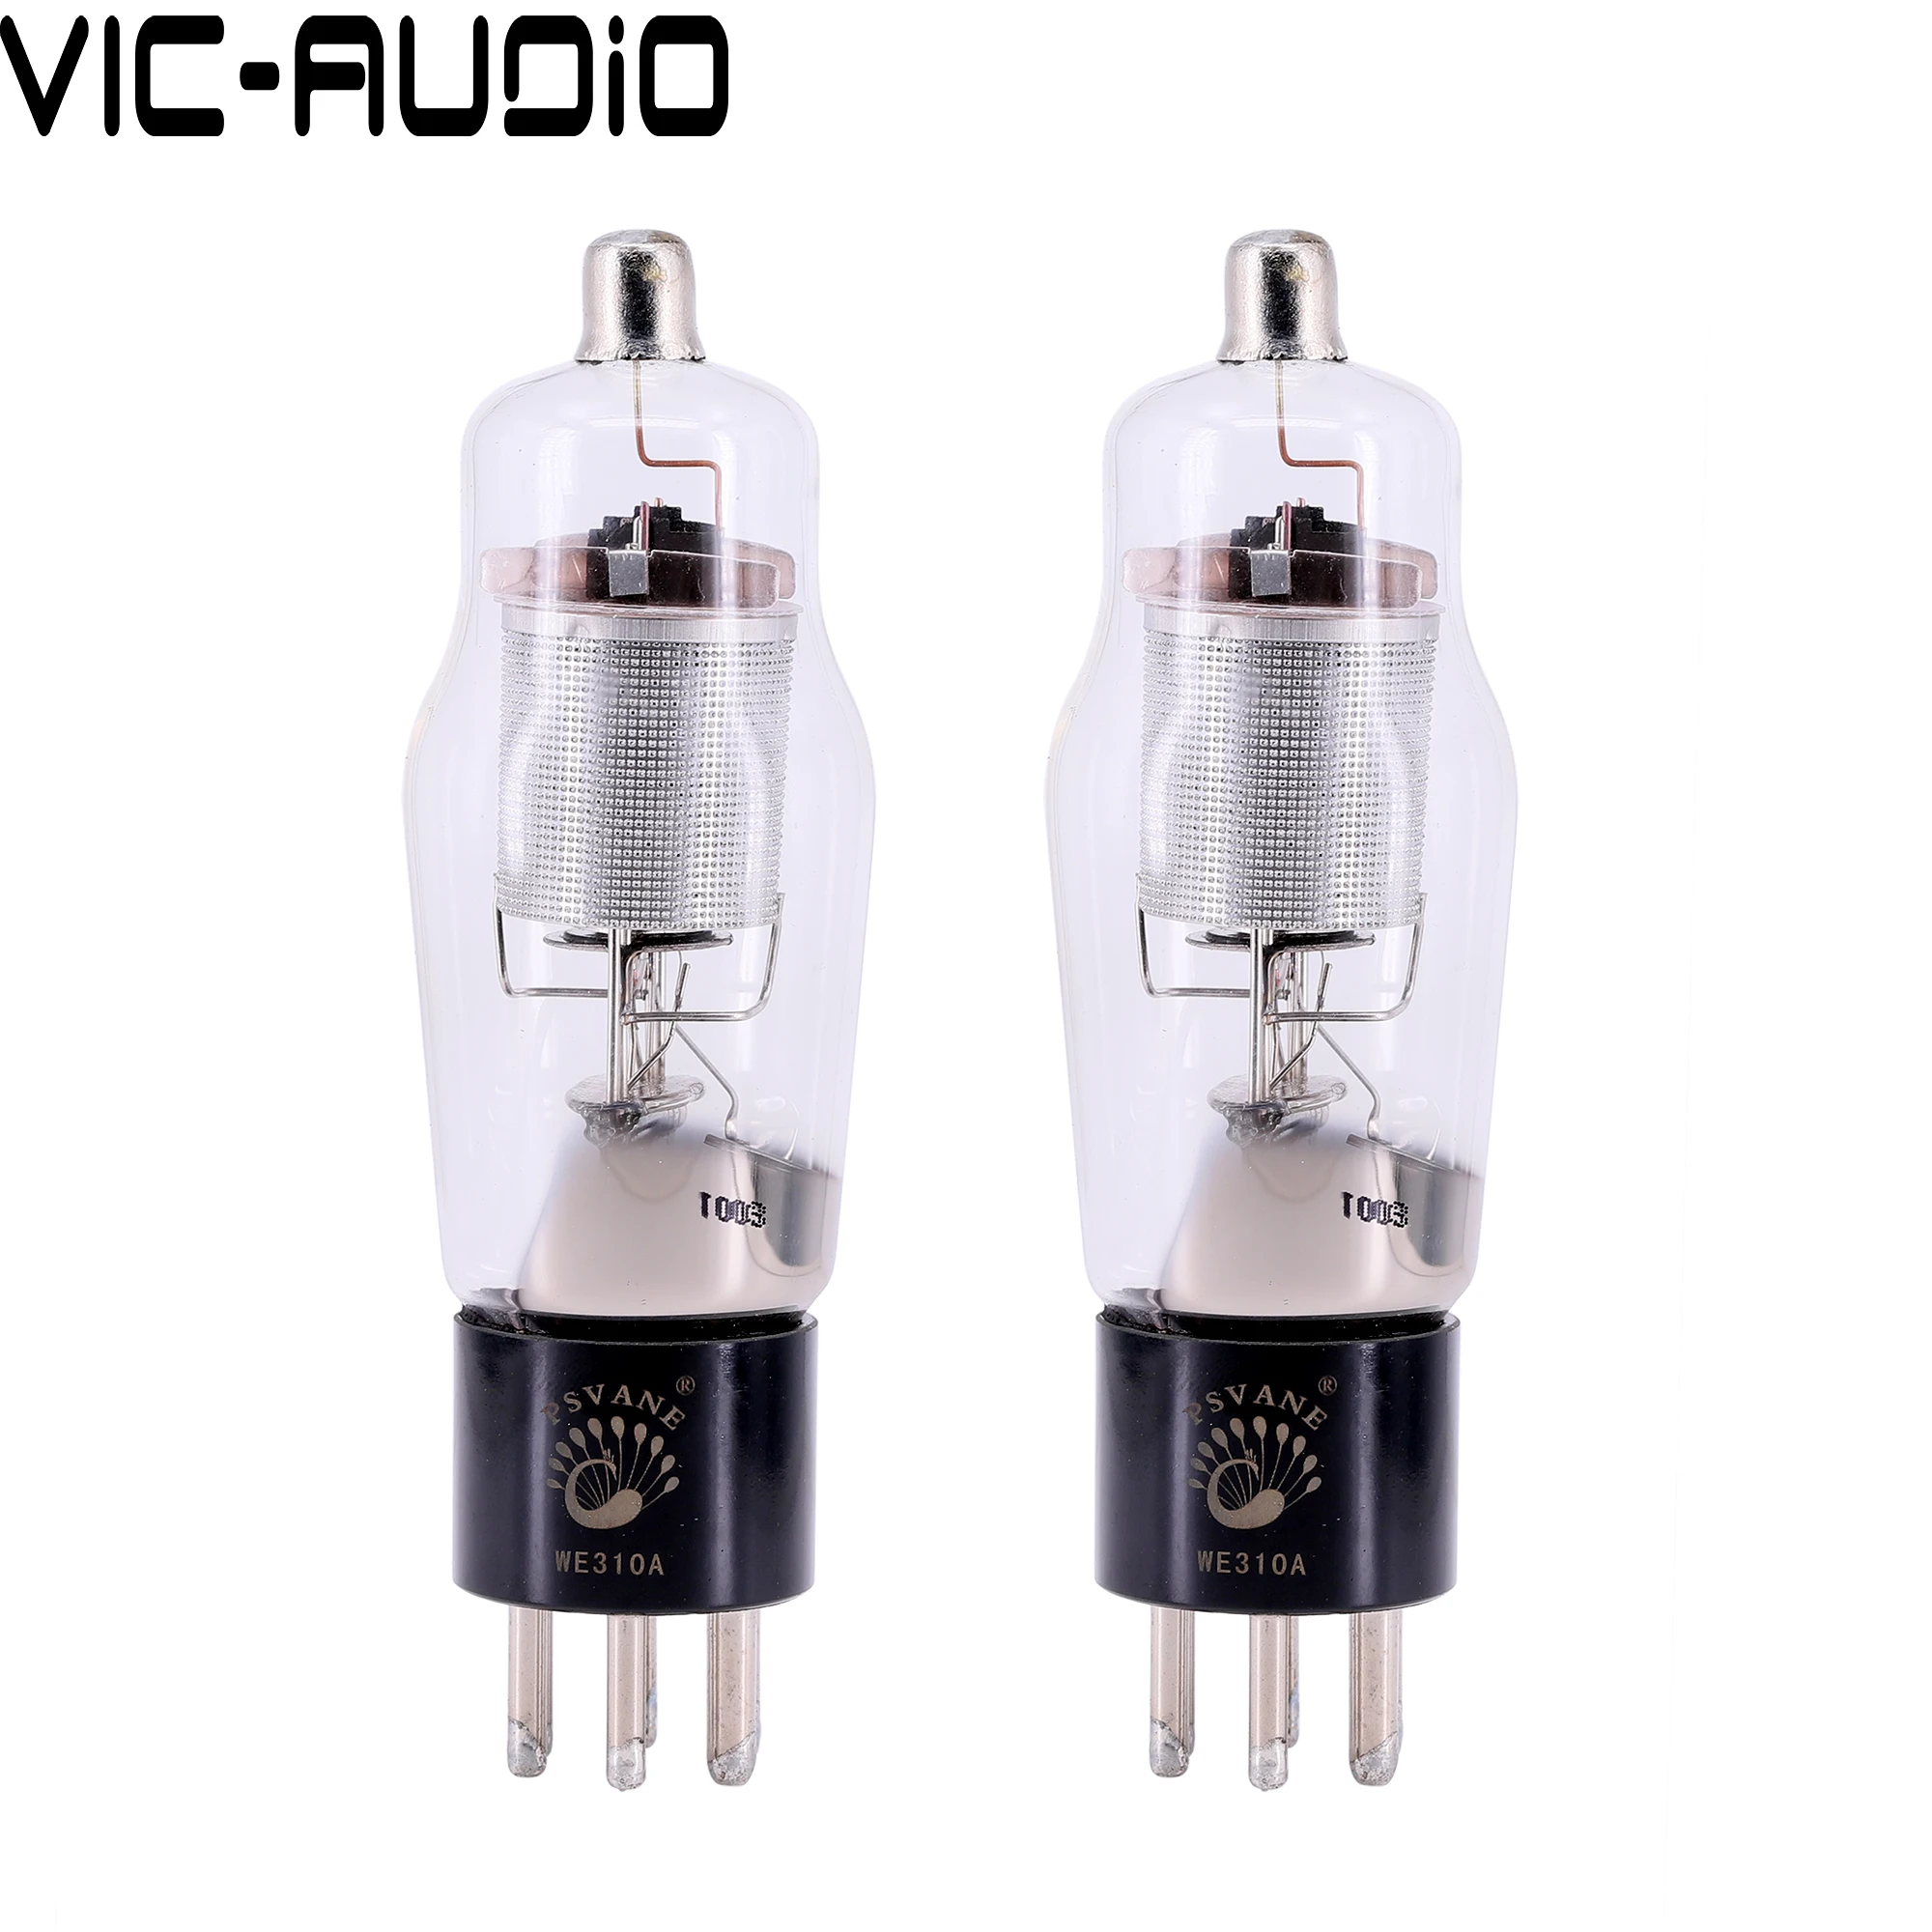 Amplifier Matched Pair PSVANE WE310A Vacuum Tube Western Electric 1 1 Replica 310A Vacuum Tube Amplifier HIFI Audio